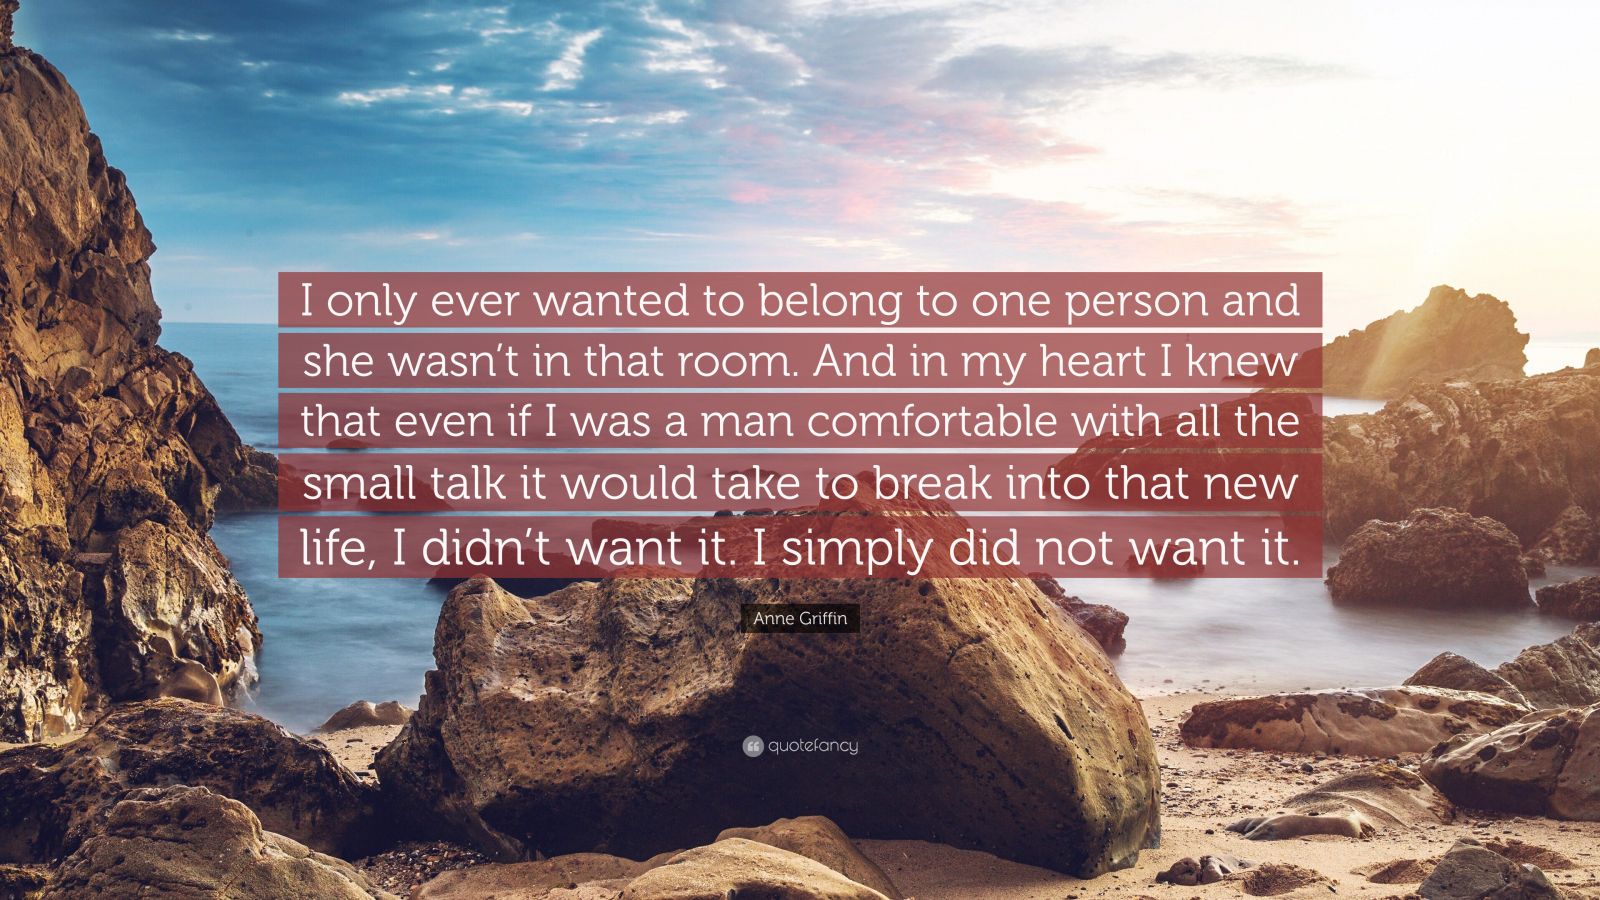 Anne Griffin Quote: “I only ever wanted to belong to one person and she ...